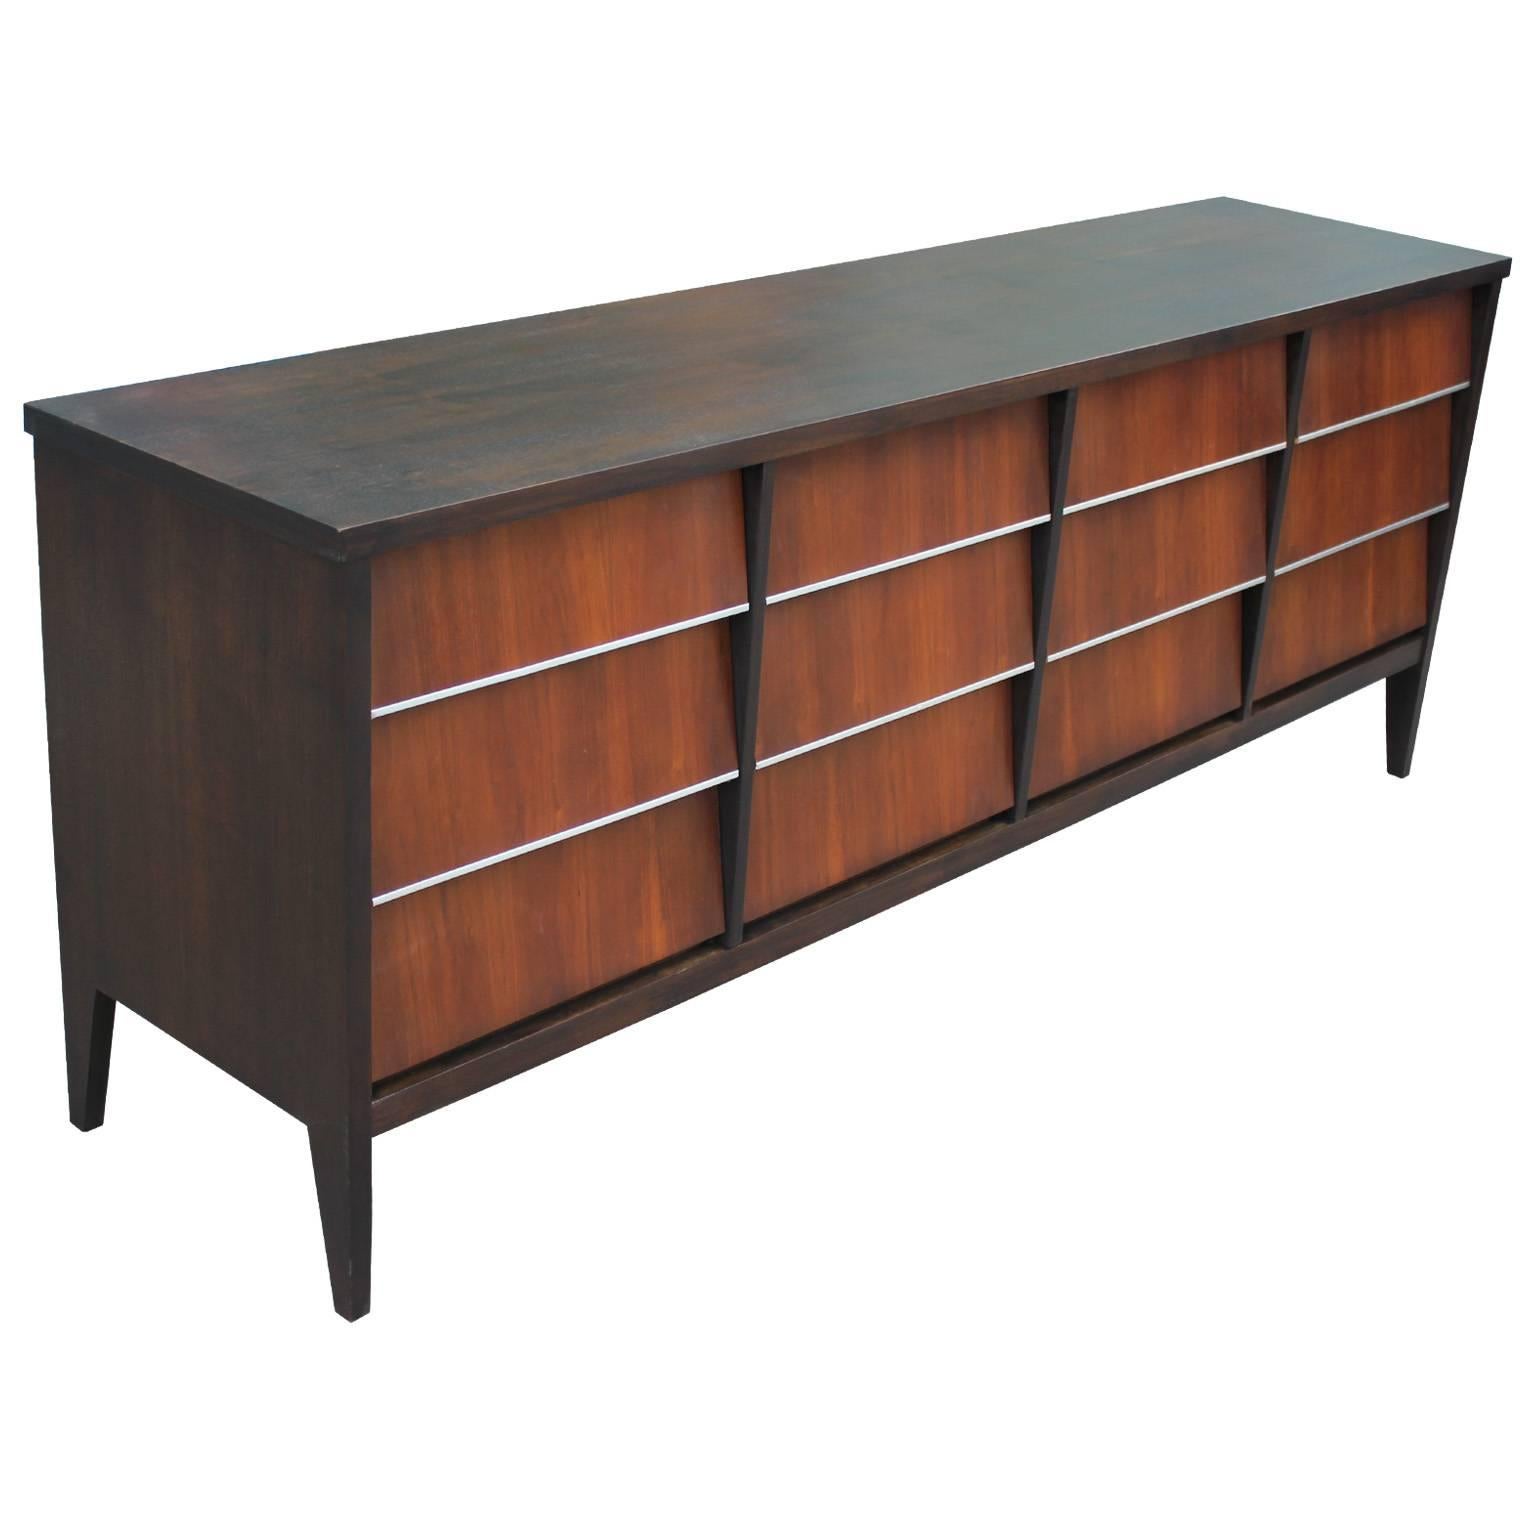 Bold a stylish 12 louvered drawer American Mid-Century Modern dresser. Dresser is freshly finished with a dark walnut case and medium walnut drawer fronts. Drawers are accented with lovely aluminum strips. Twelve drawers provide excellent storage